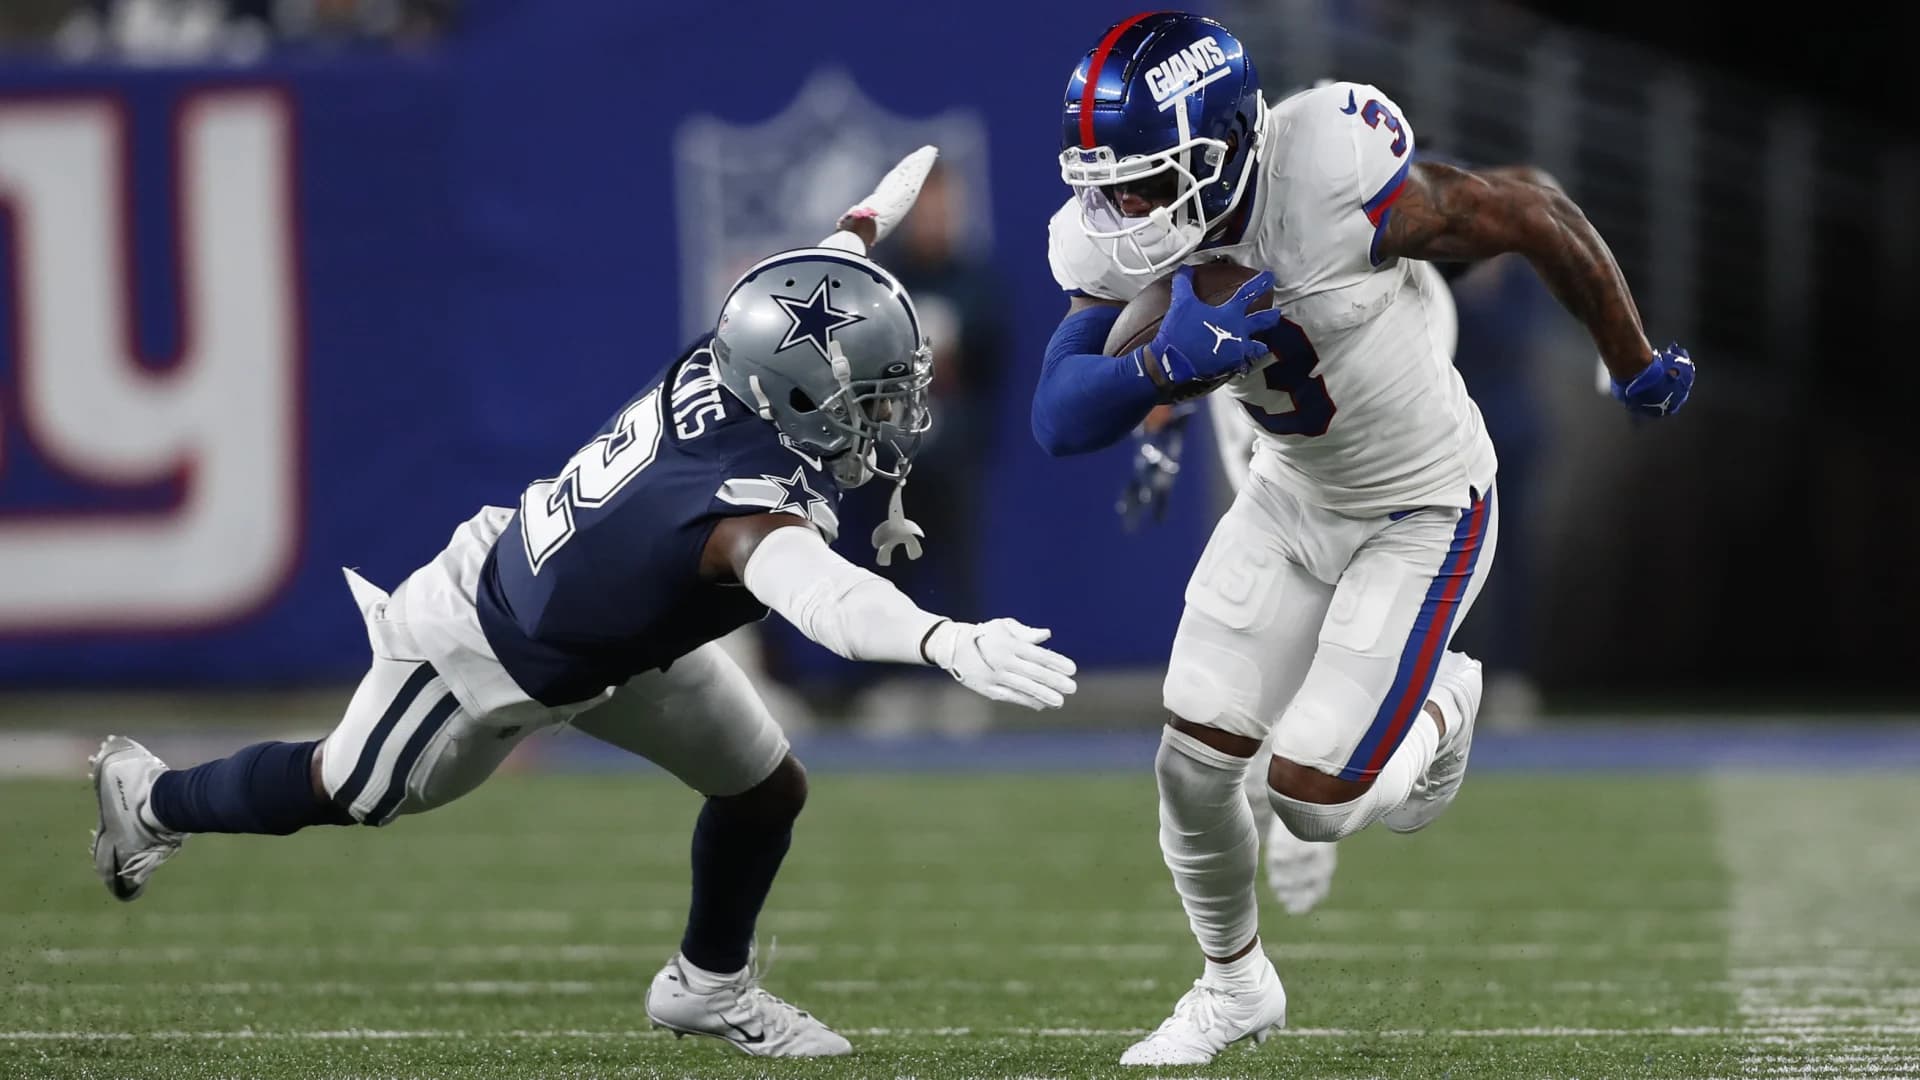 AP source: Giants, WR Sterling Shepard agree on 1-year deal